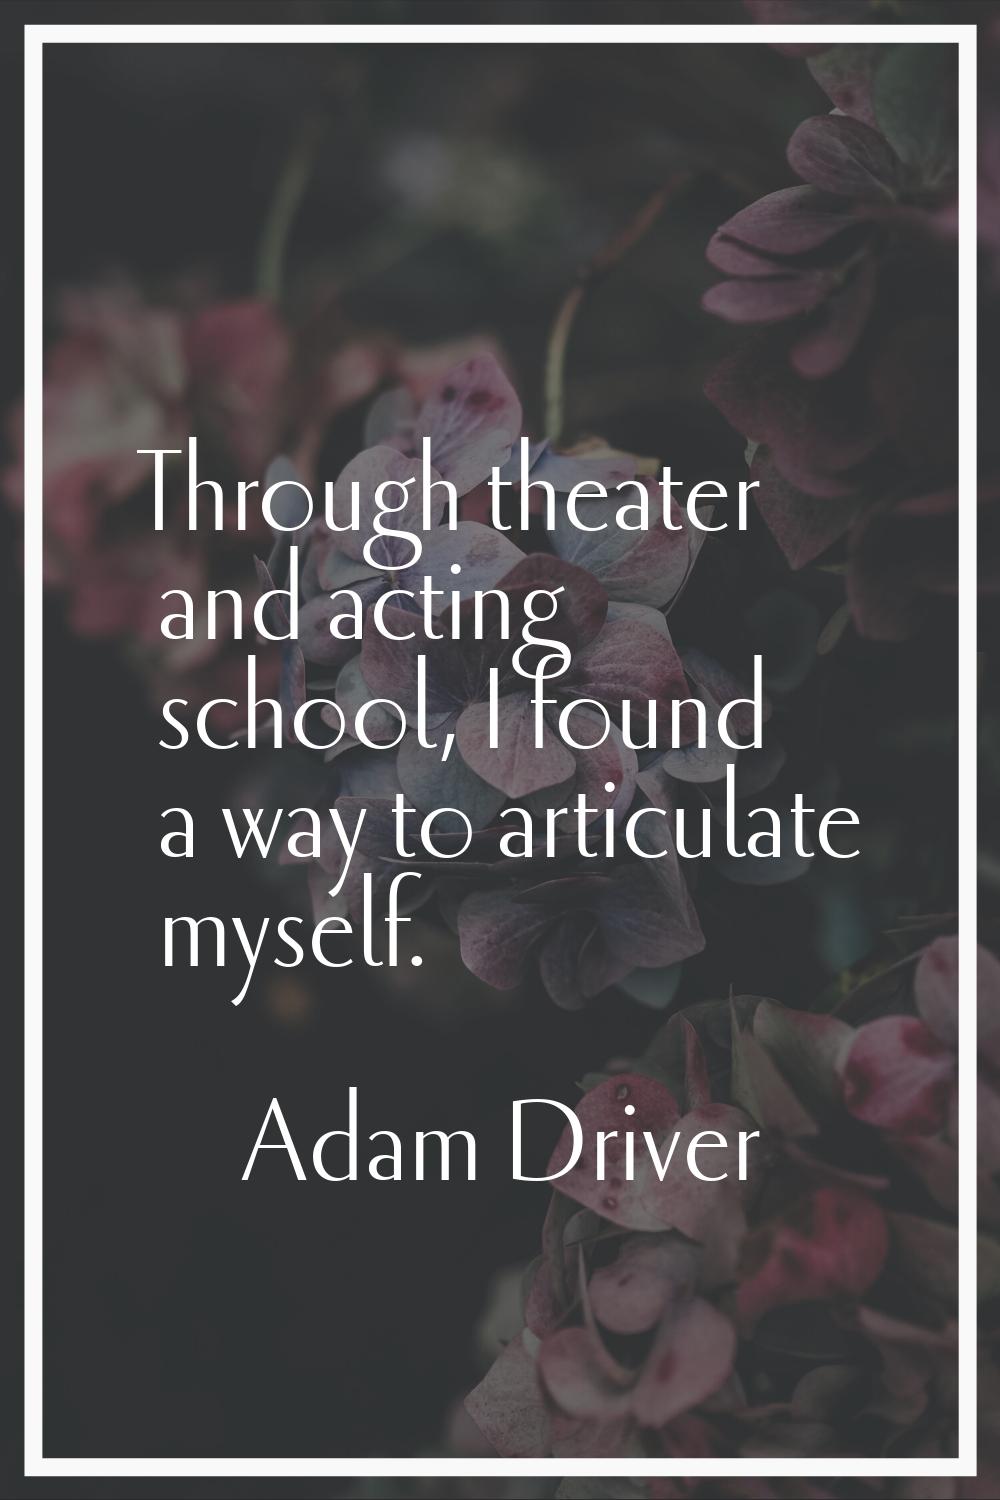 Through theater and acting school, I found a way to articulate myself.